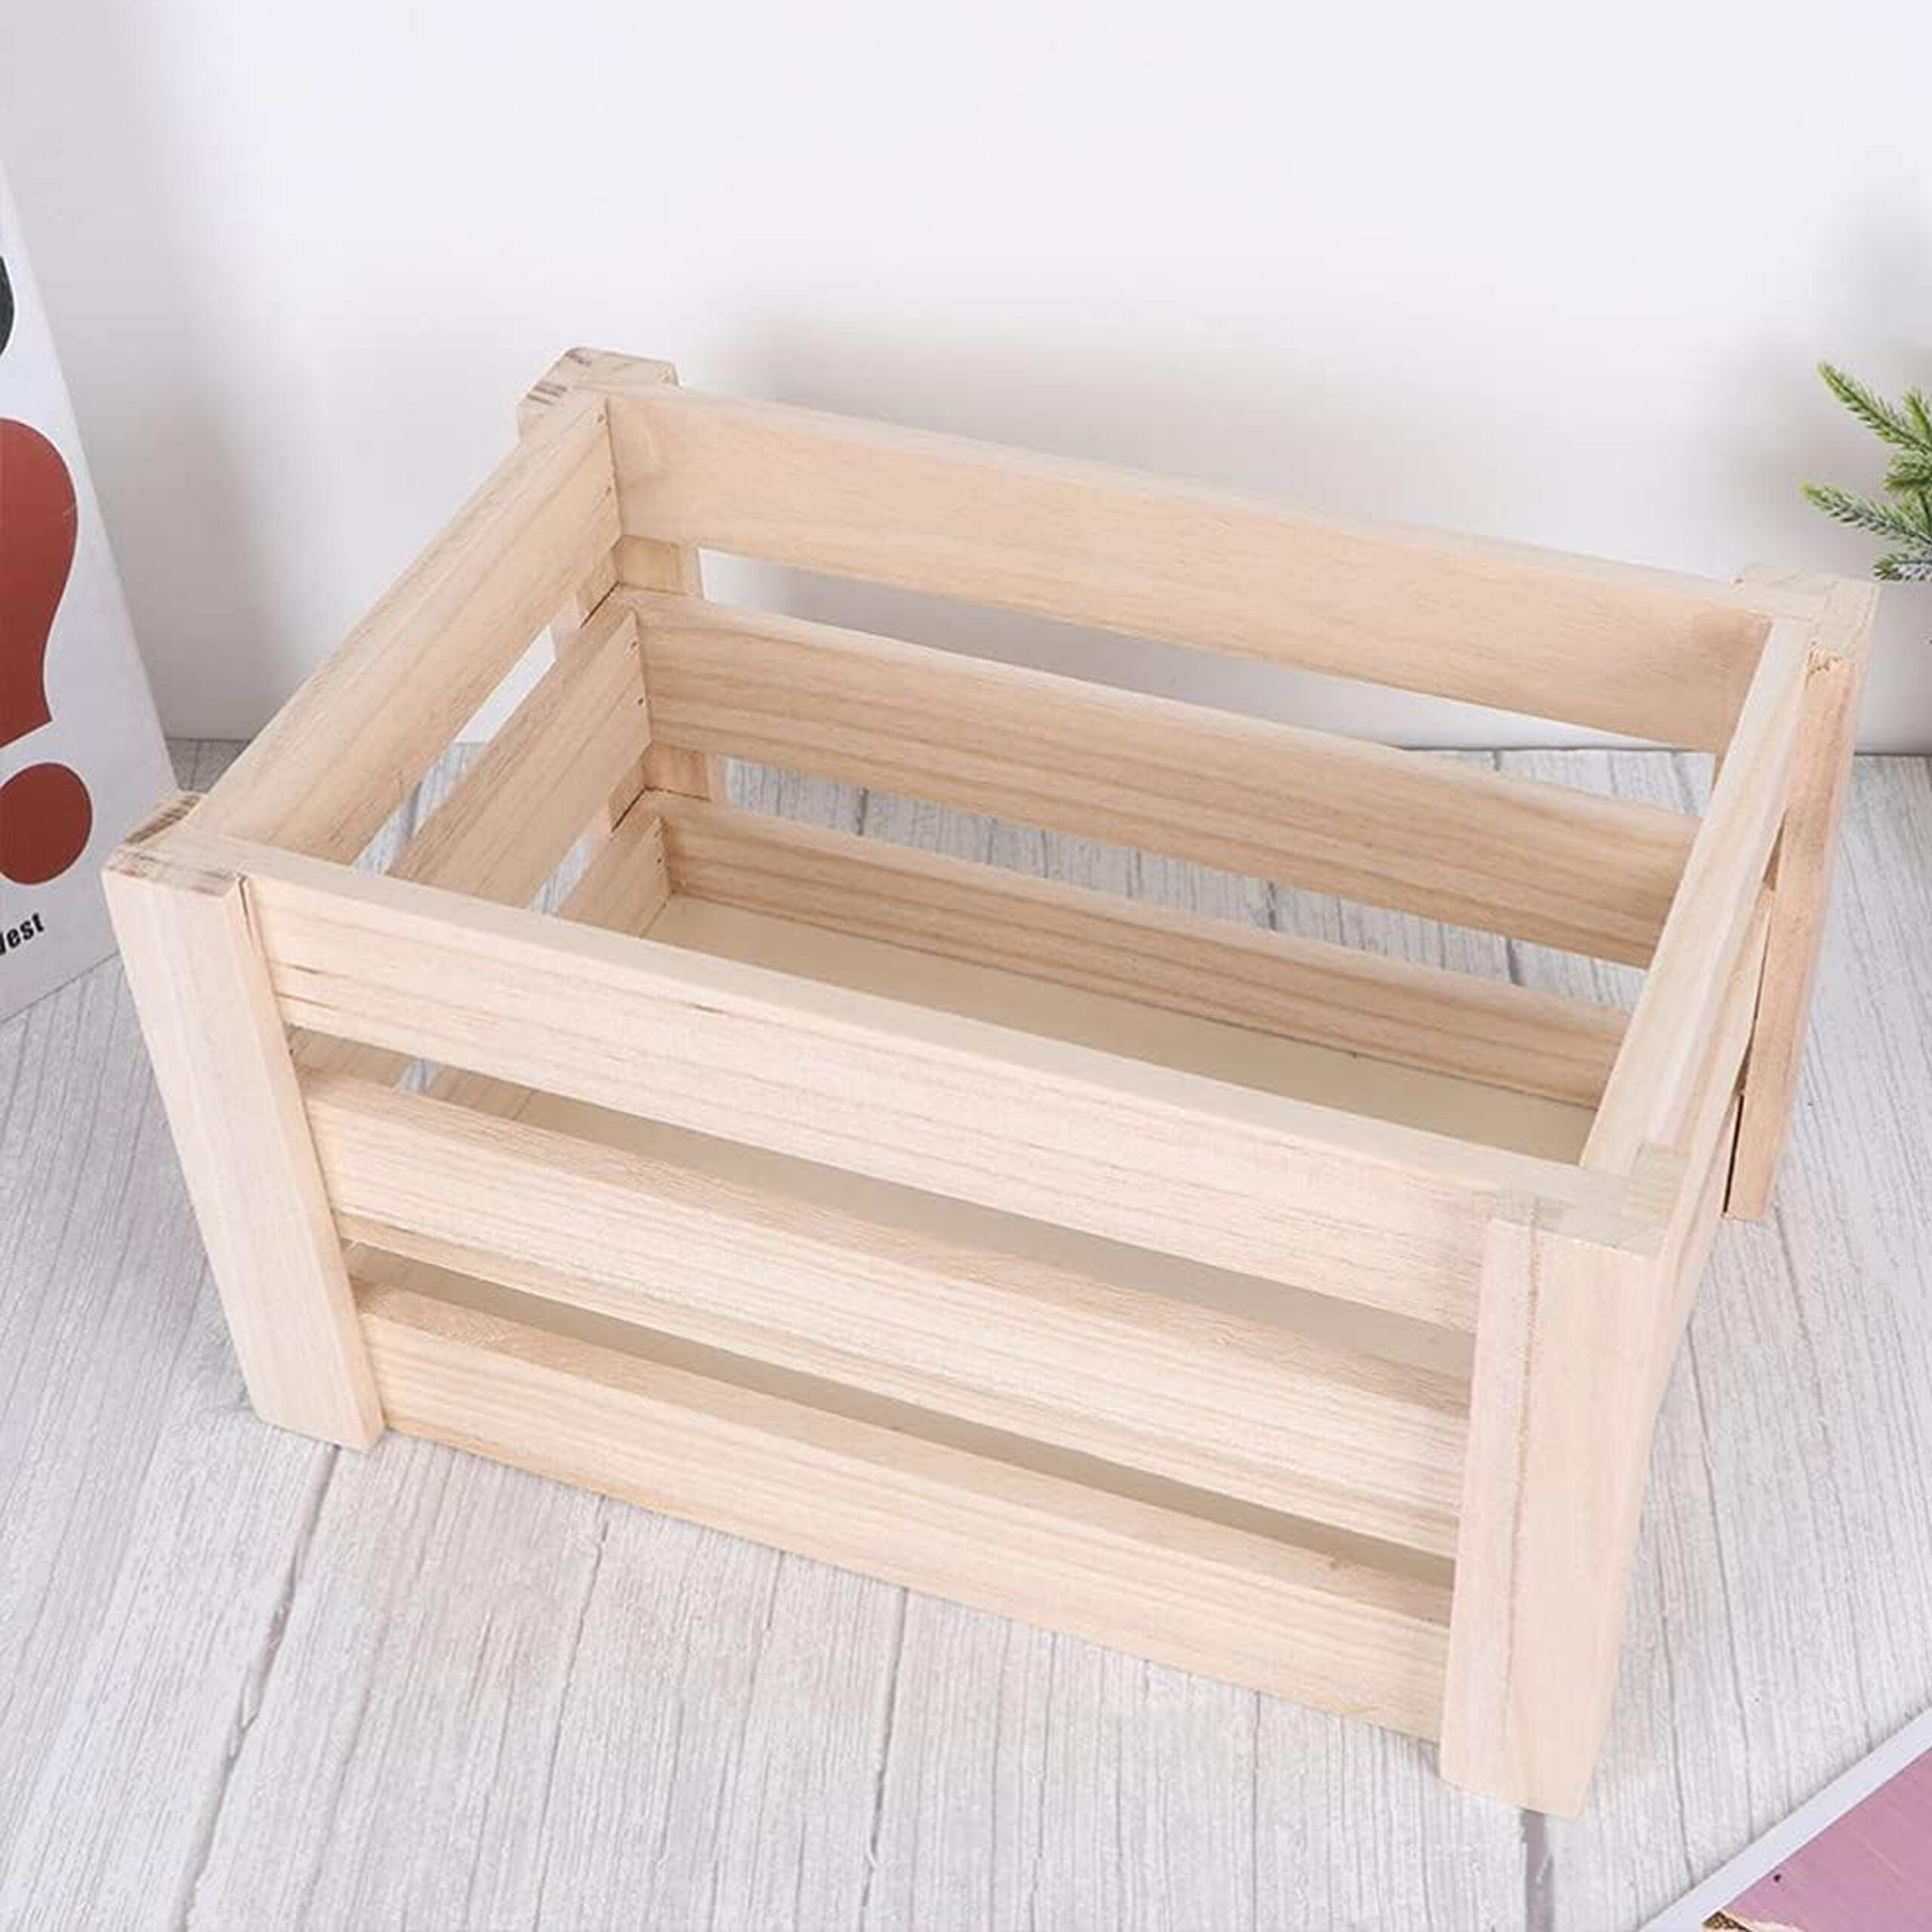 NATURAL WOODEN
CRATE 25X18X15